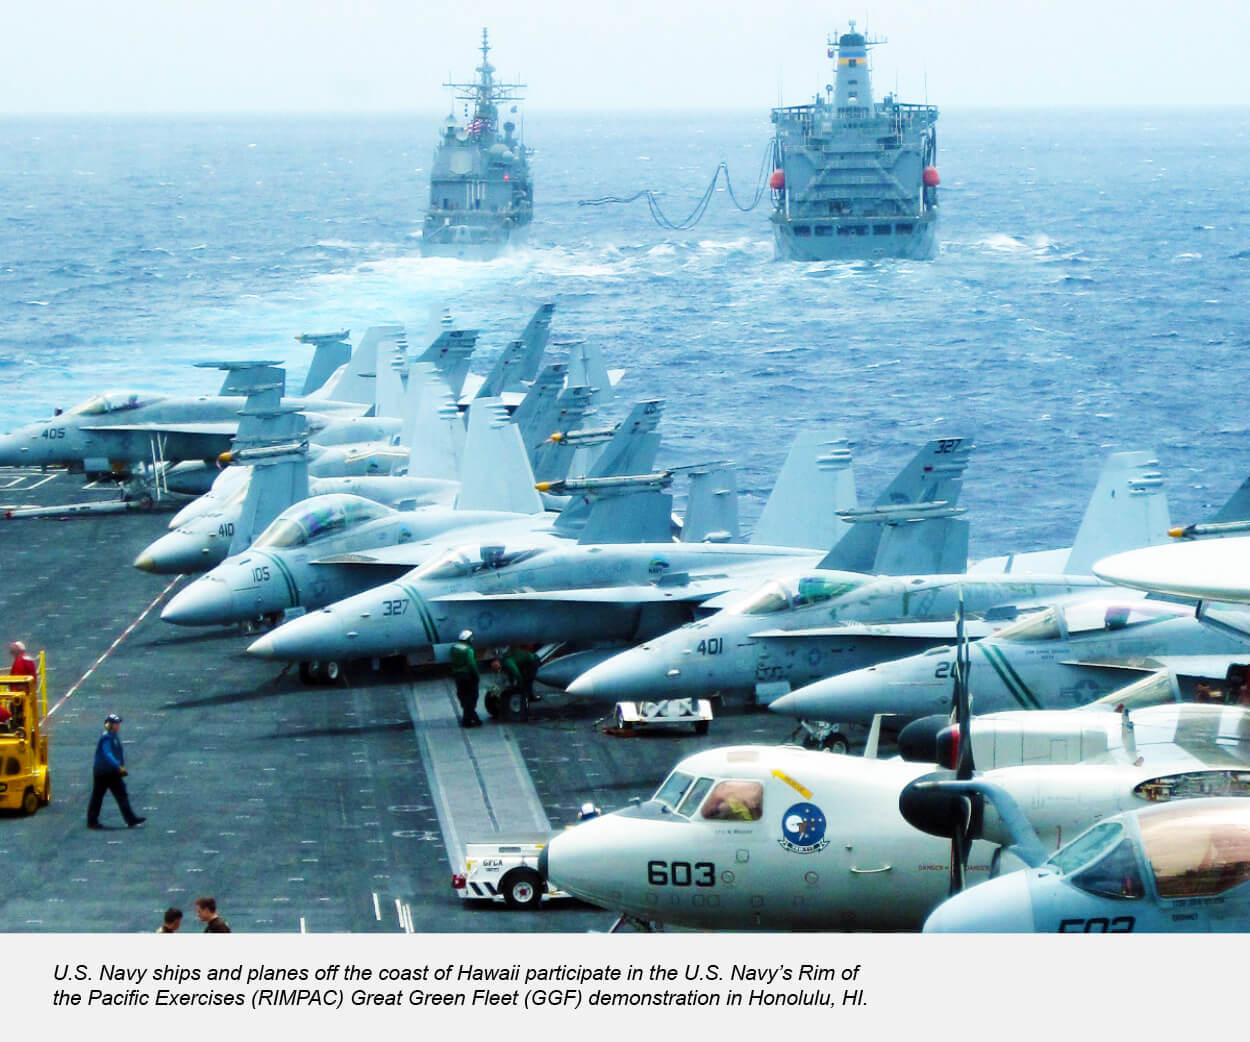 Jets and ships refueling with advanced biofuels. U.S. Navy ships and planes off the coast of Hawaii participate in the U.S. Navy’s Rim of the Pacific 